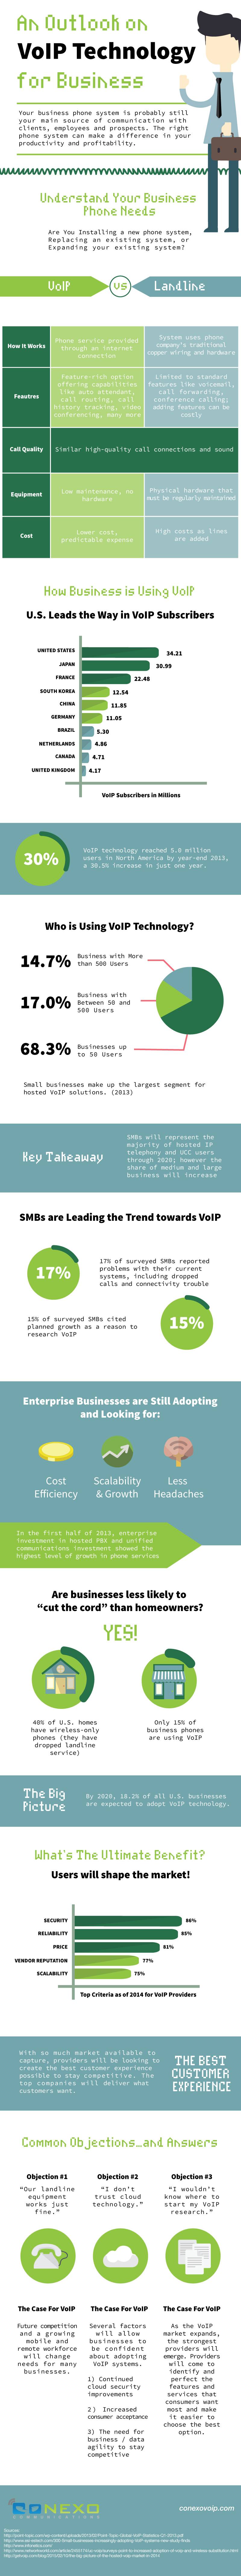 final-an-outlook-on-voip-technology-for-business-compressed